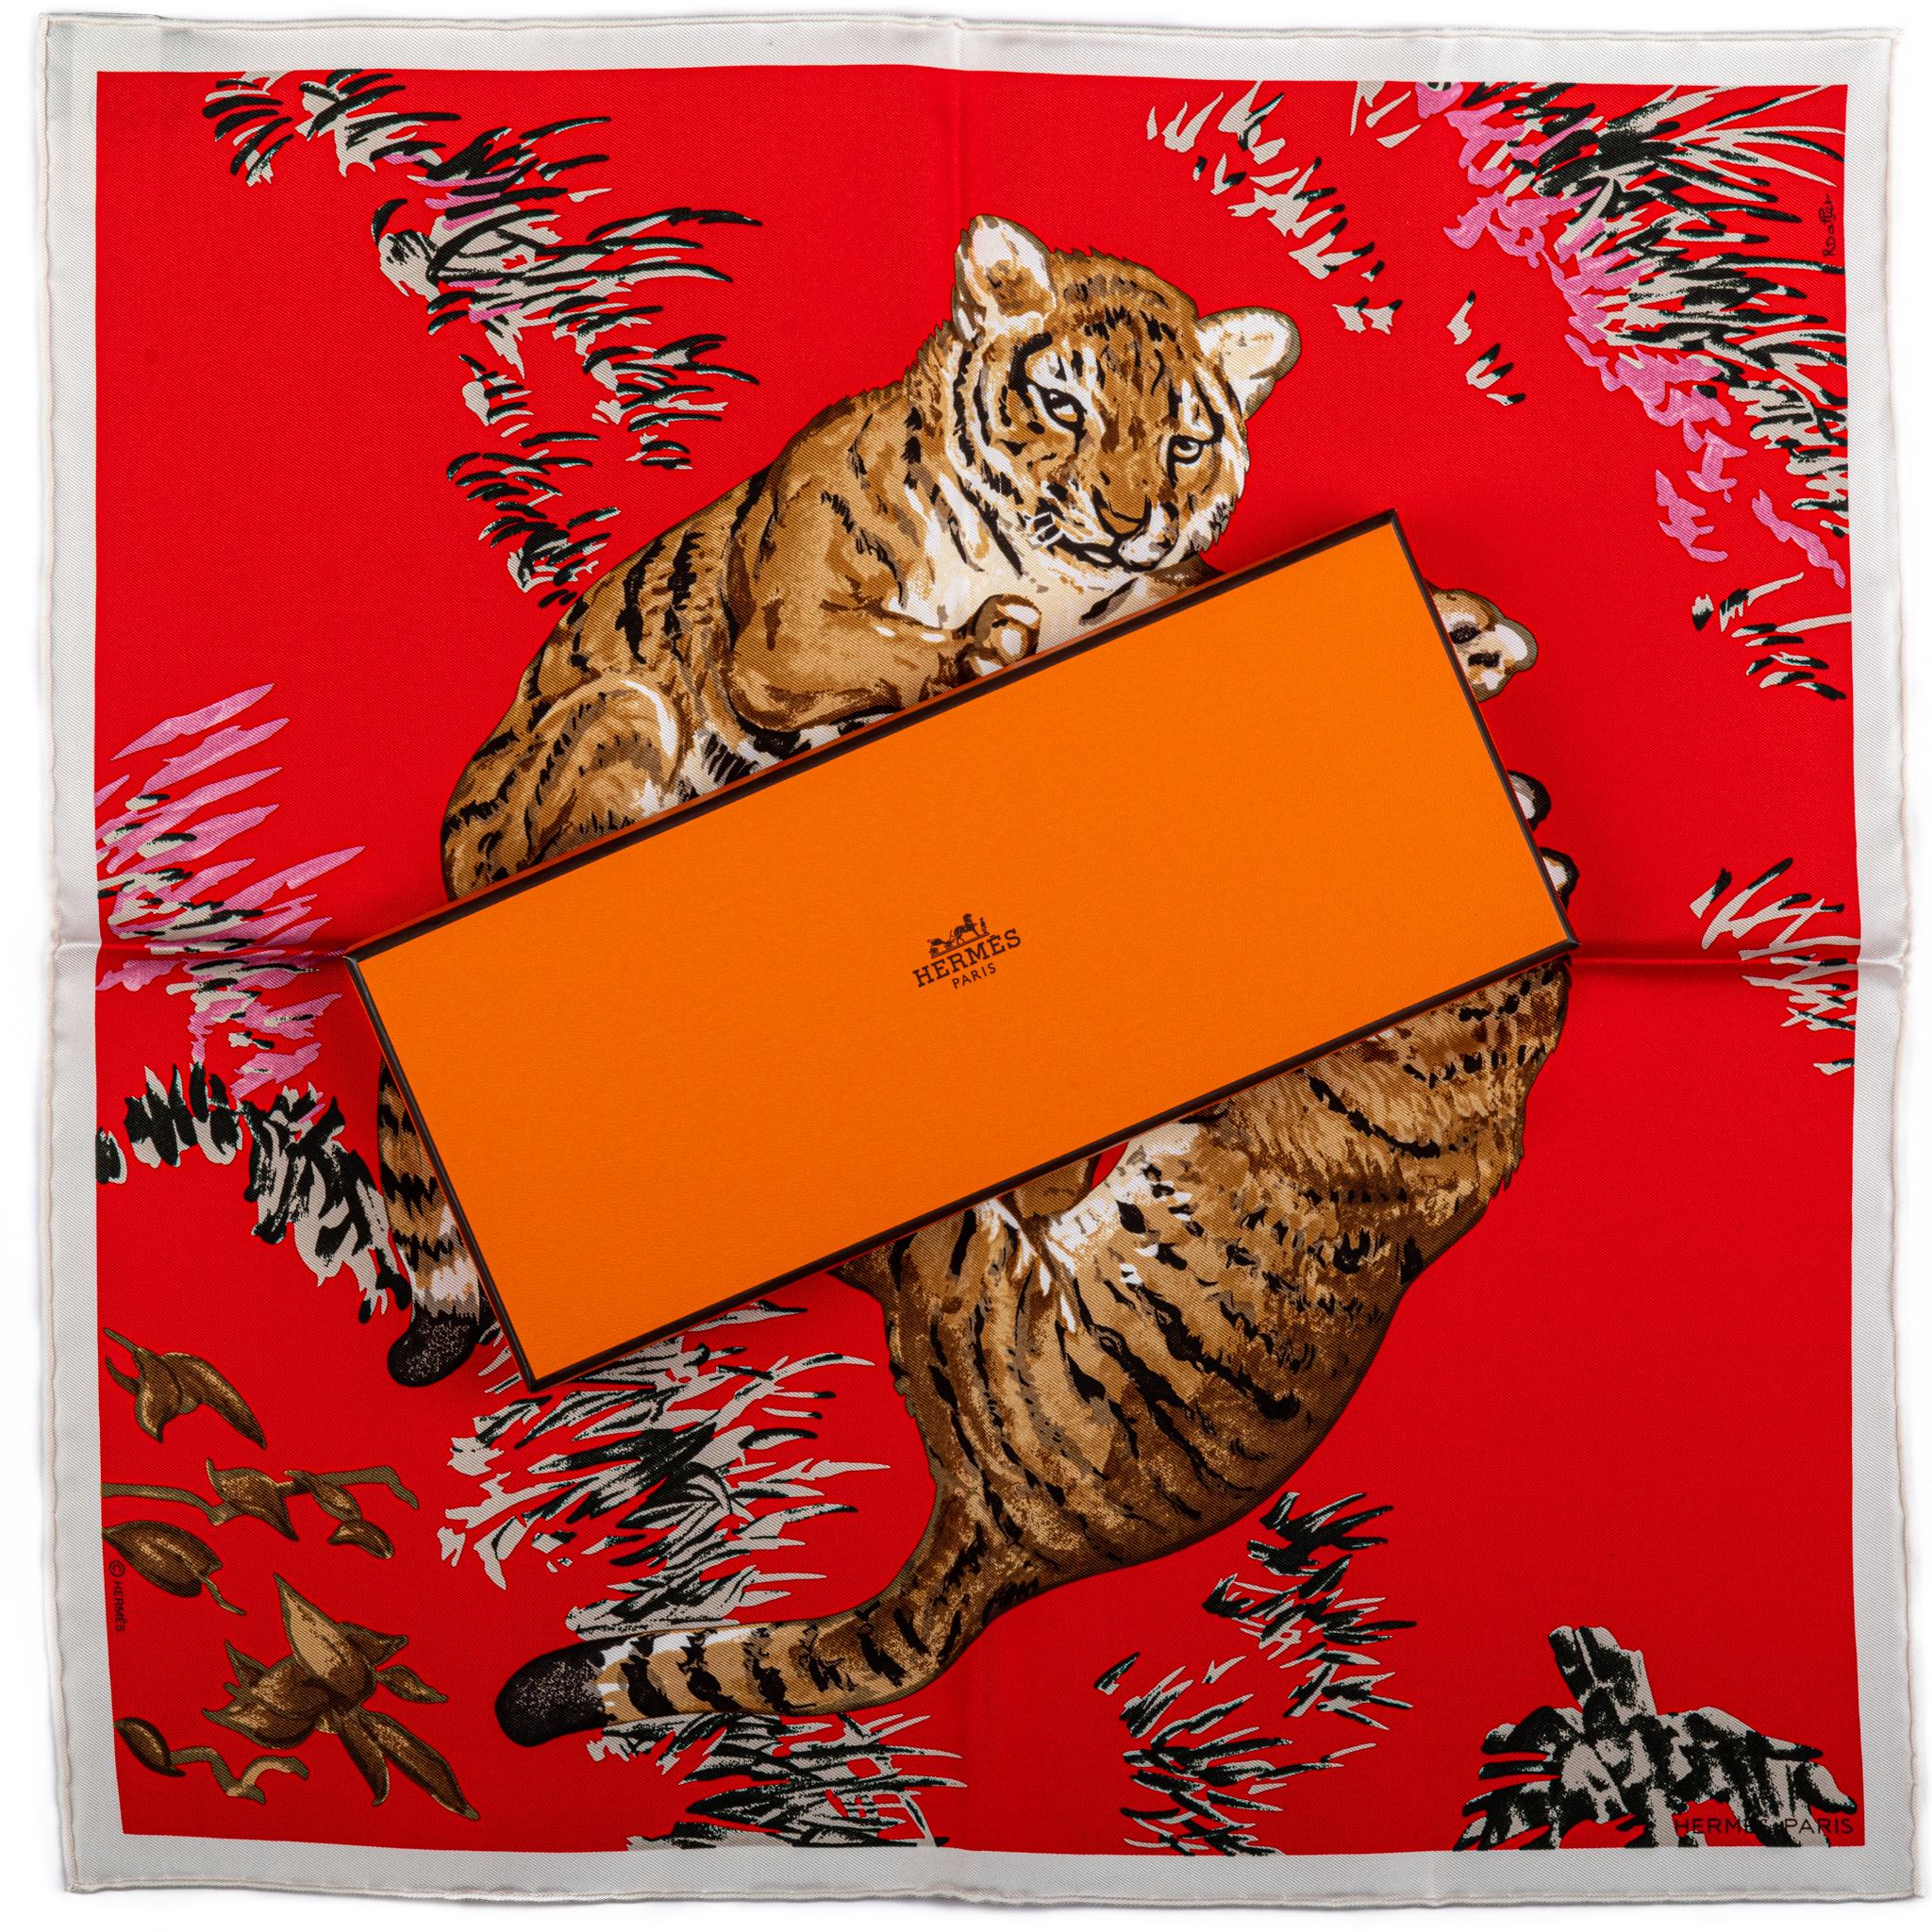 Hermès silk Tiger Cubs gavroche scarf in red. Hand-rolled edges. New in box.